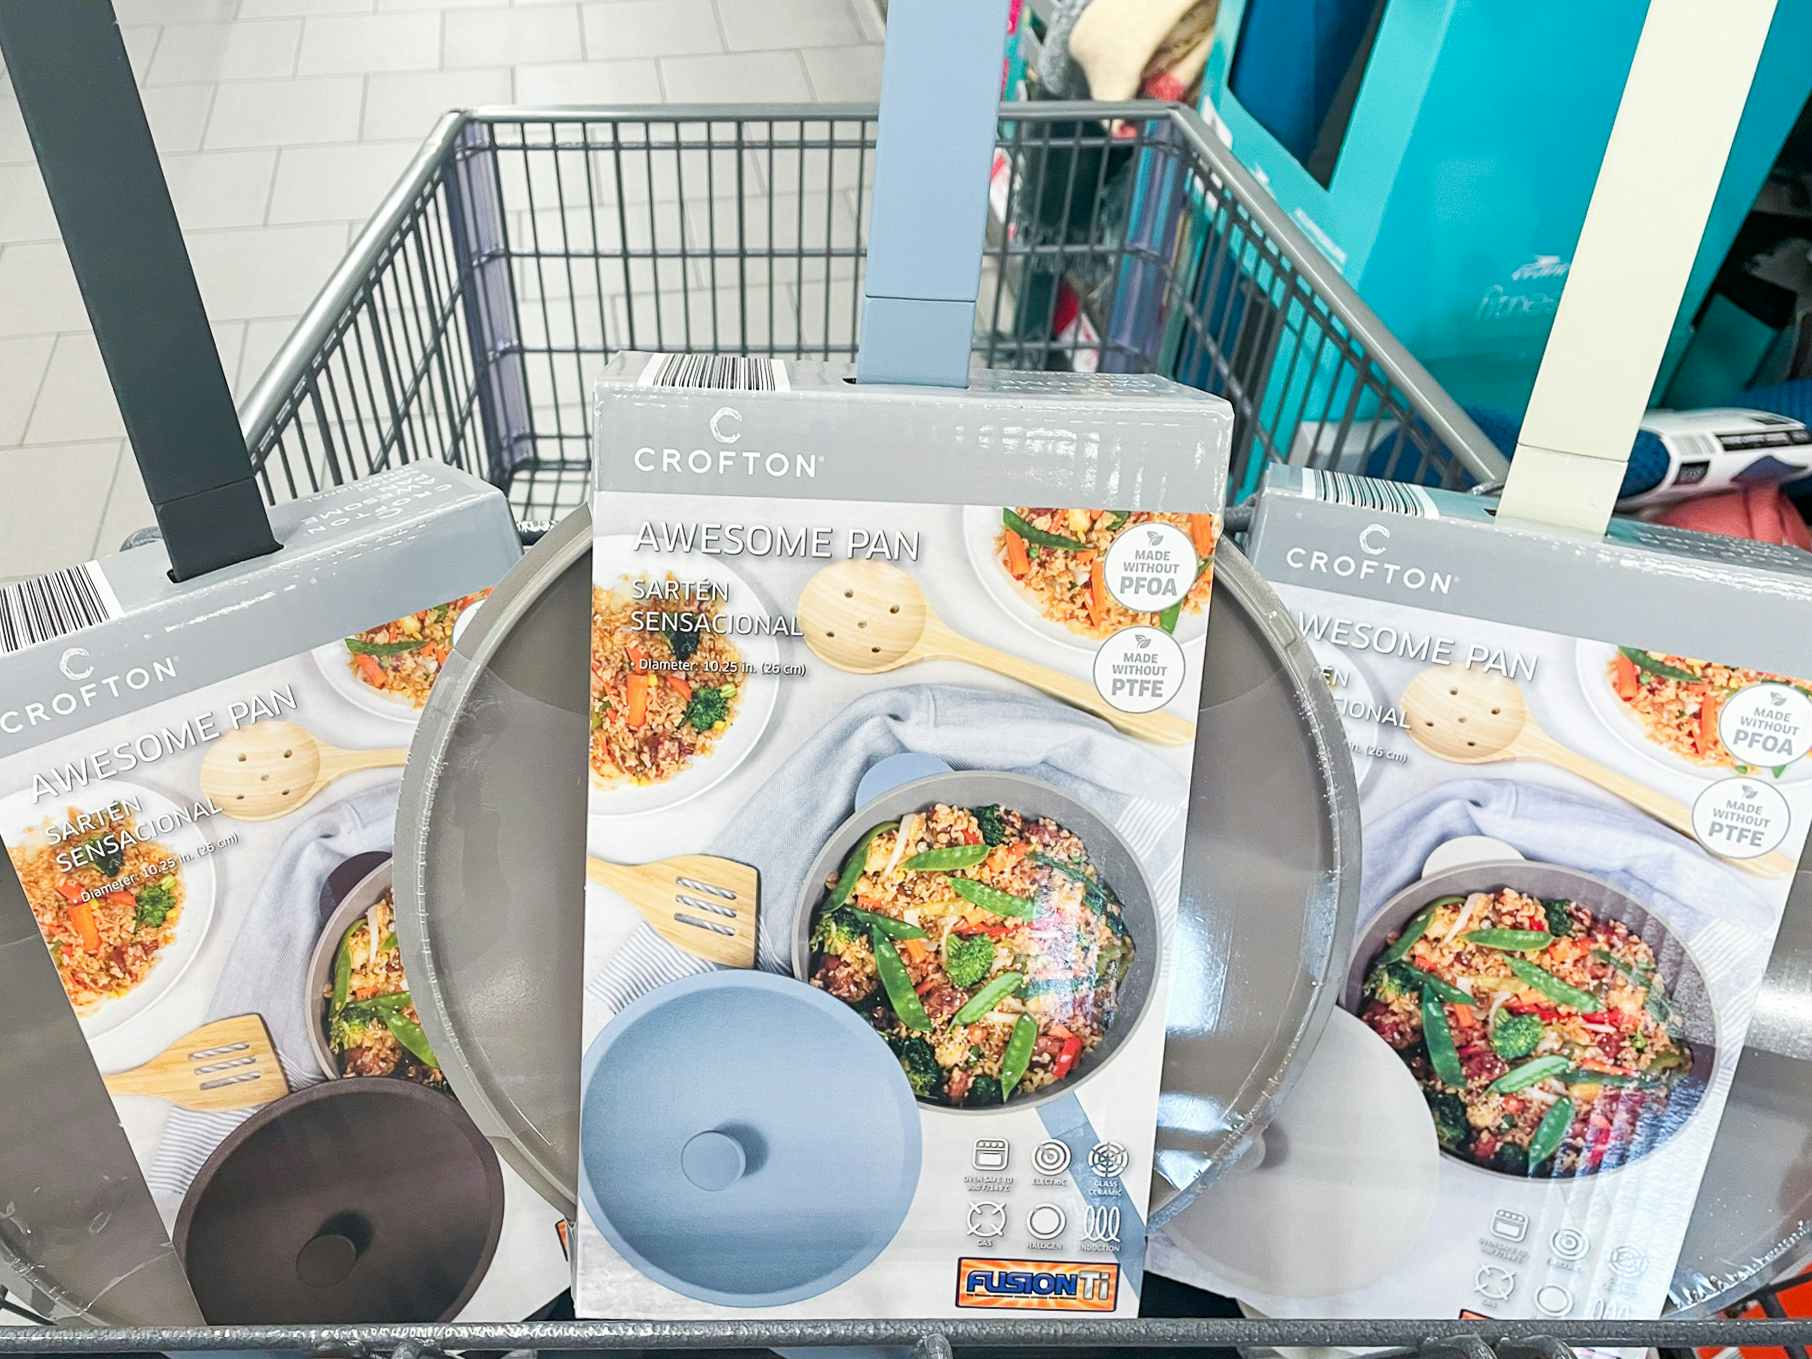 Three Crofton Awesome Pans in a cart at Aldi